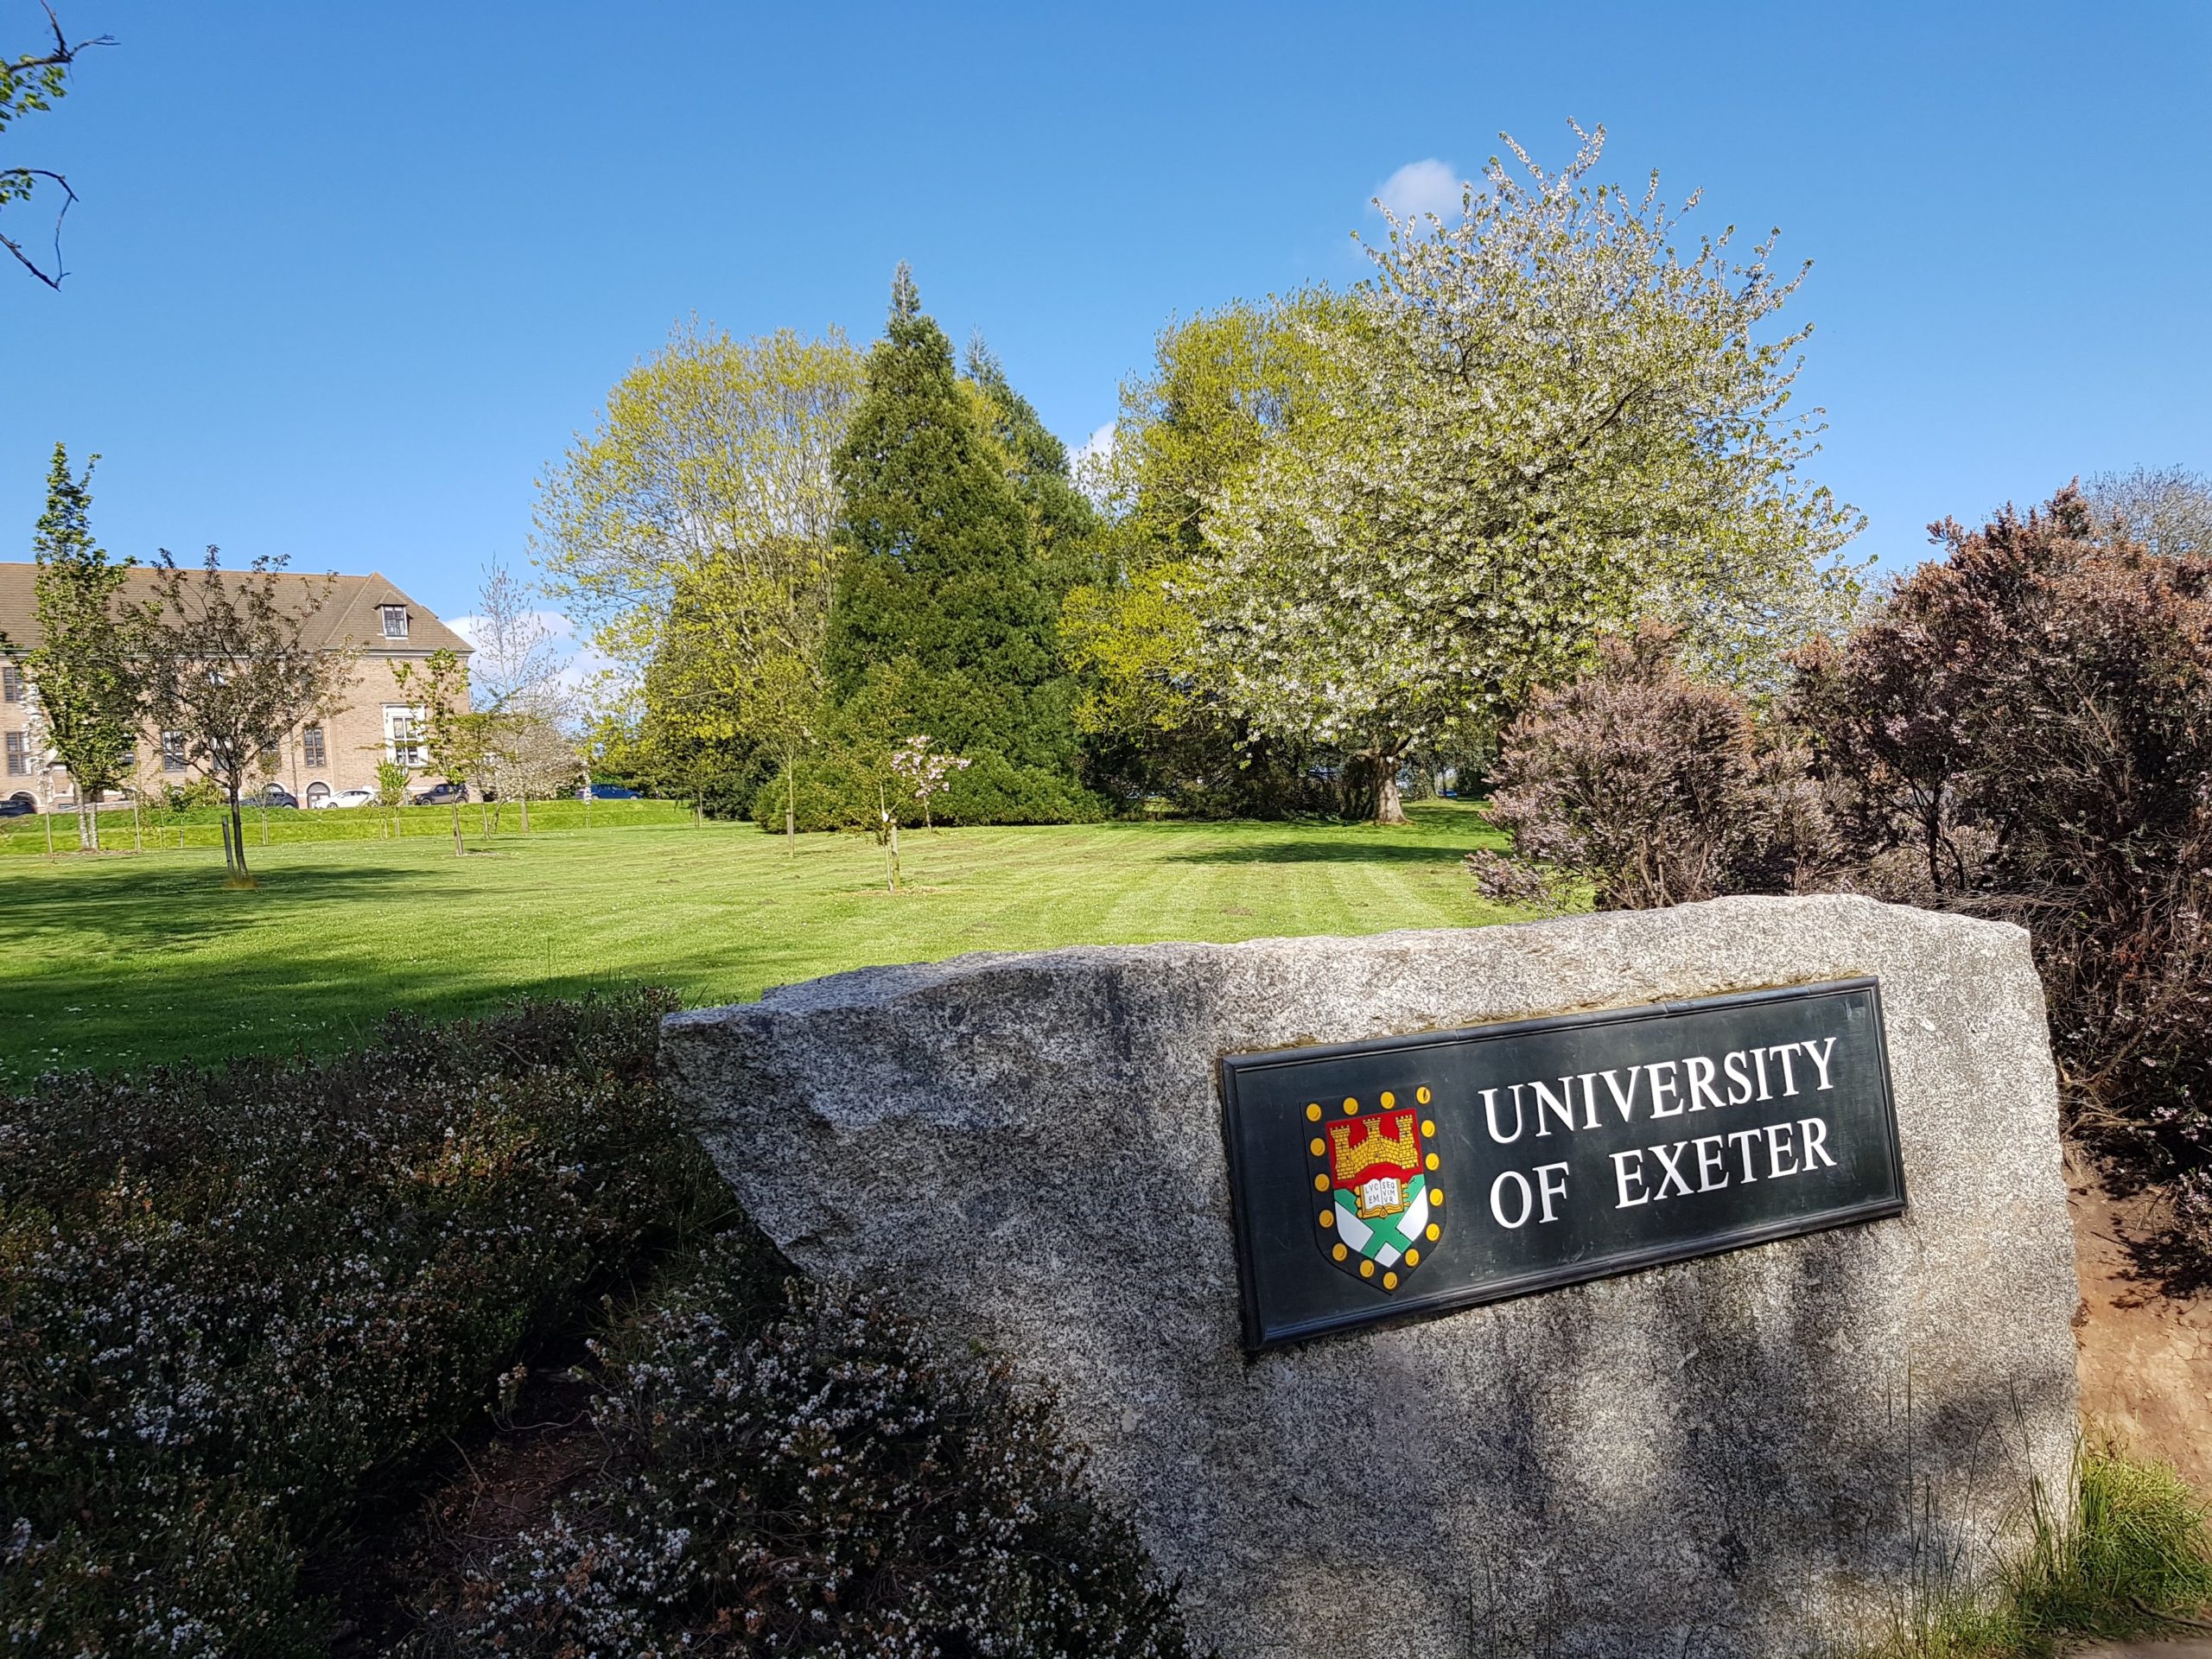 True beauty lies within…the University of Exeter